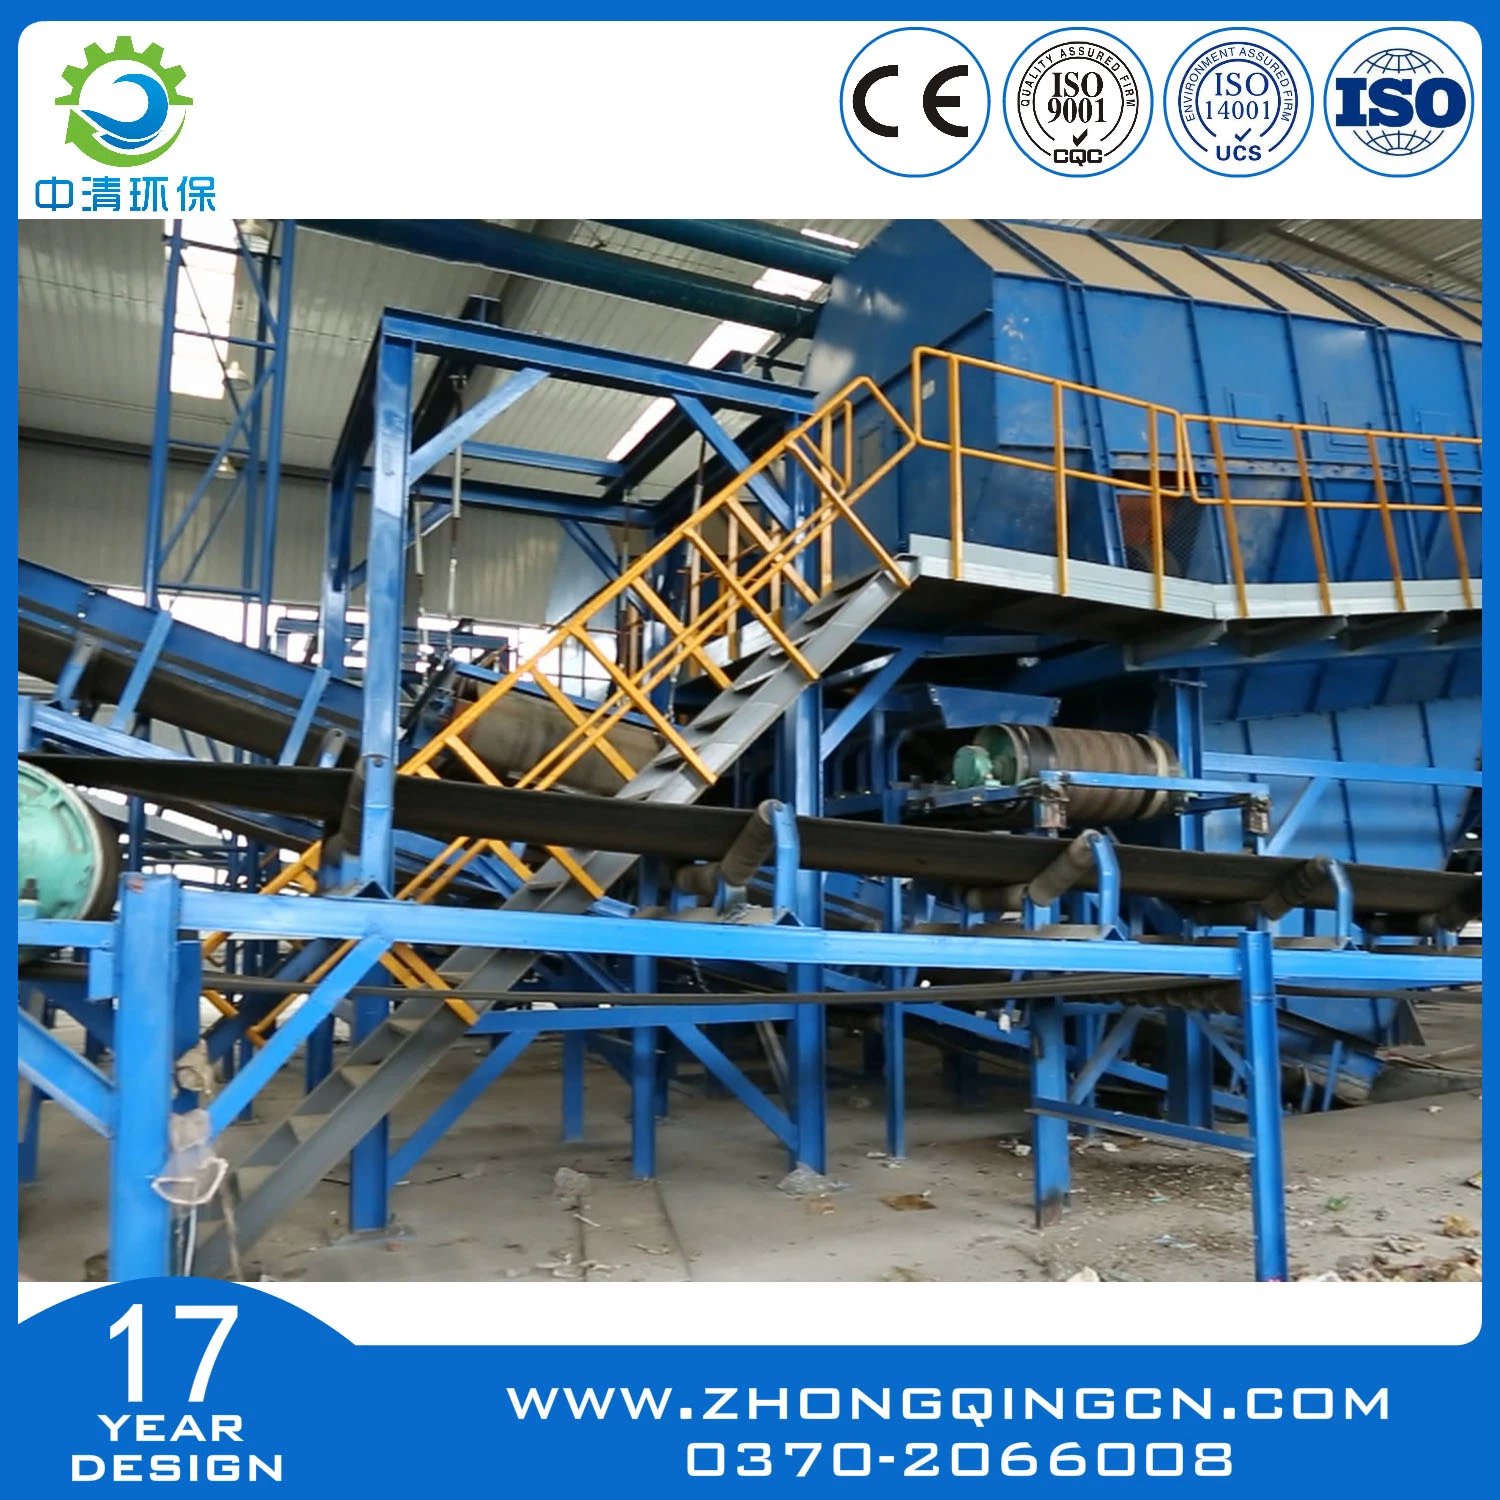 Dangerous Waste/Hospital Waste/Medical Waste Pyrolysis Machine/Recycling Machine/Waste Treatment Equipment to Diesel Fuel with CE, SGS, ISO, BV